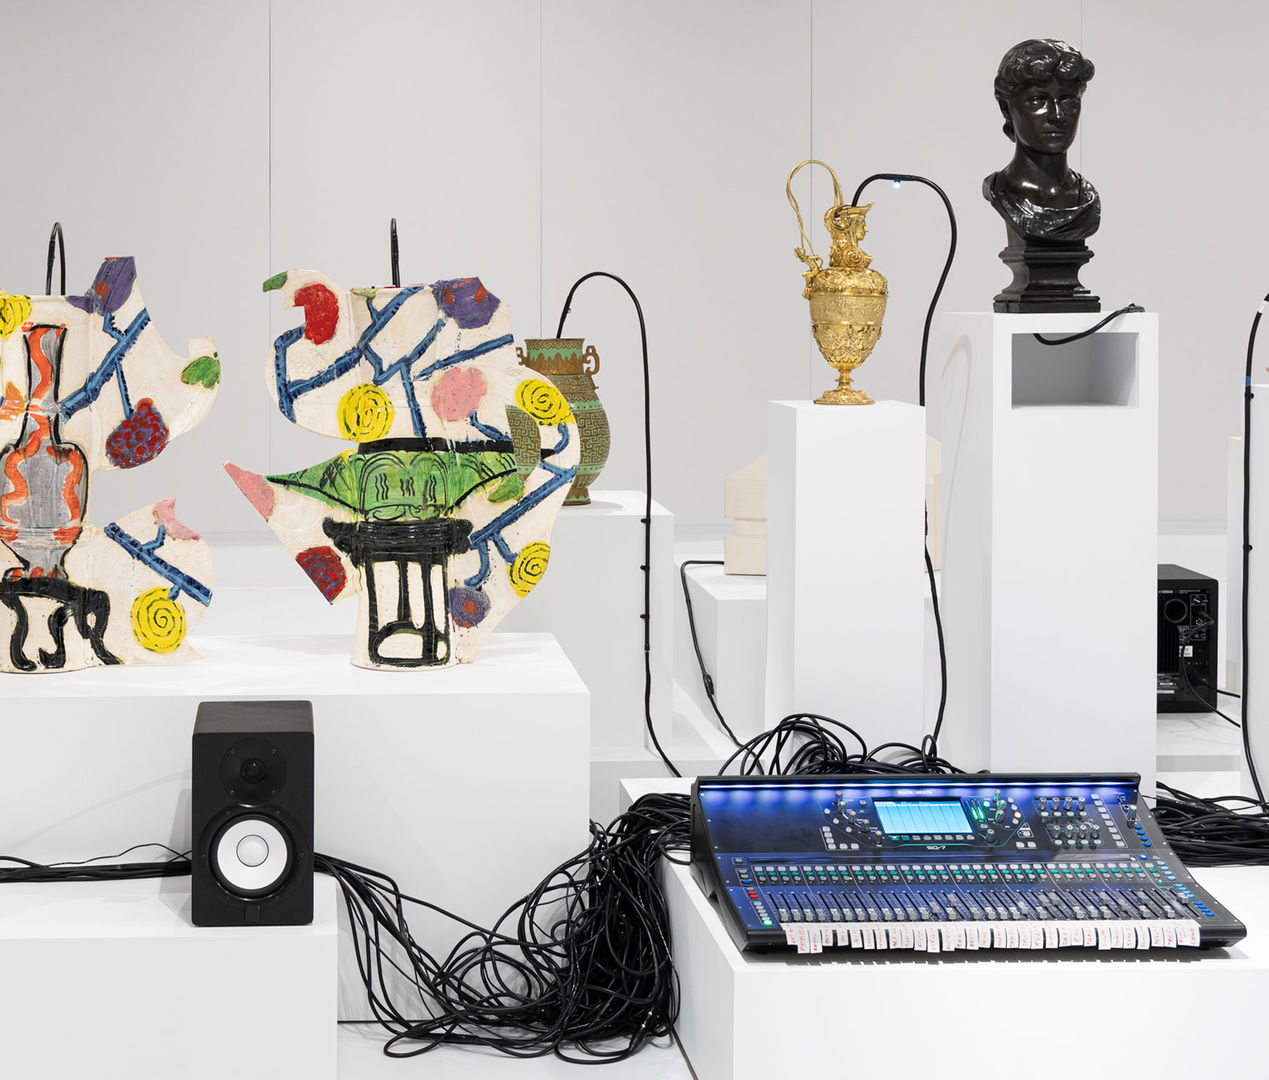 Gallery view of Oliver Beer Vessel Orchestra exhibition featuring different vessels from the museum, an audio system, and speakers.